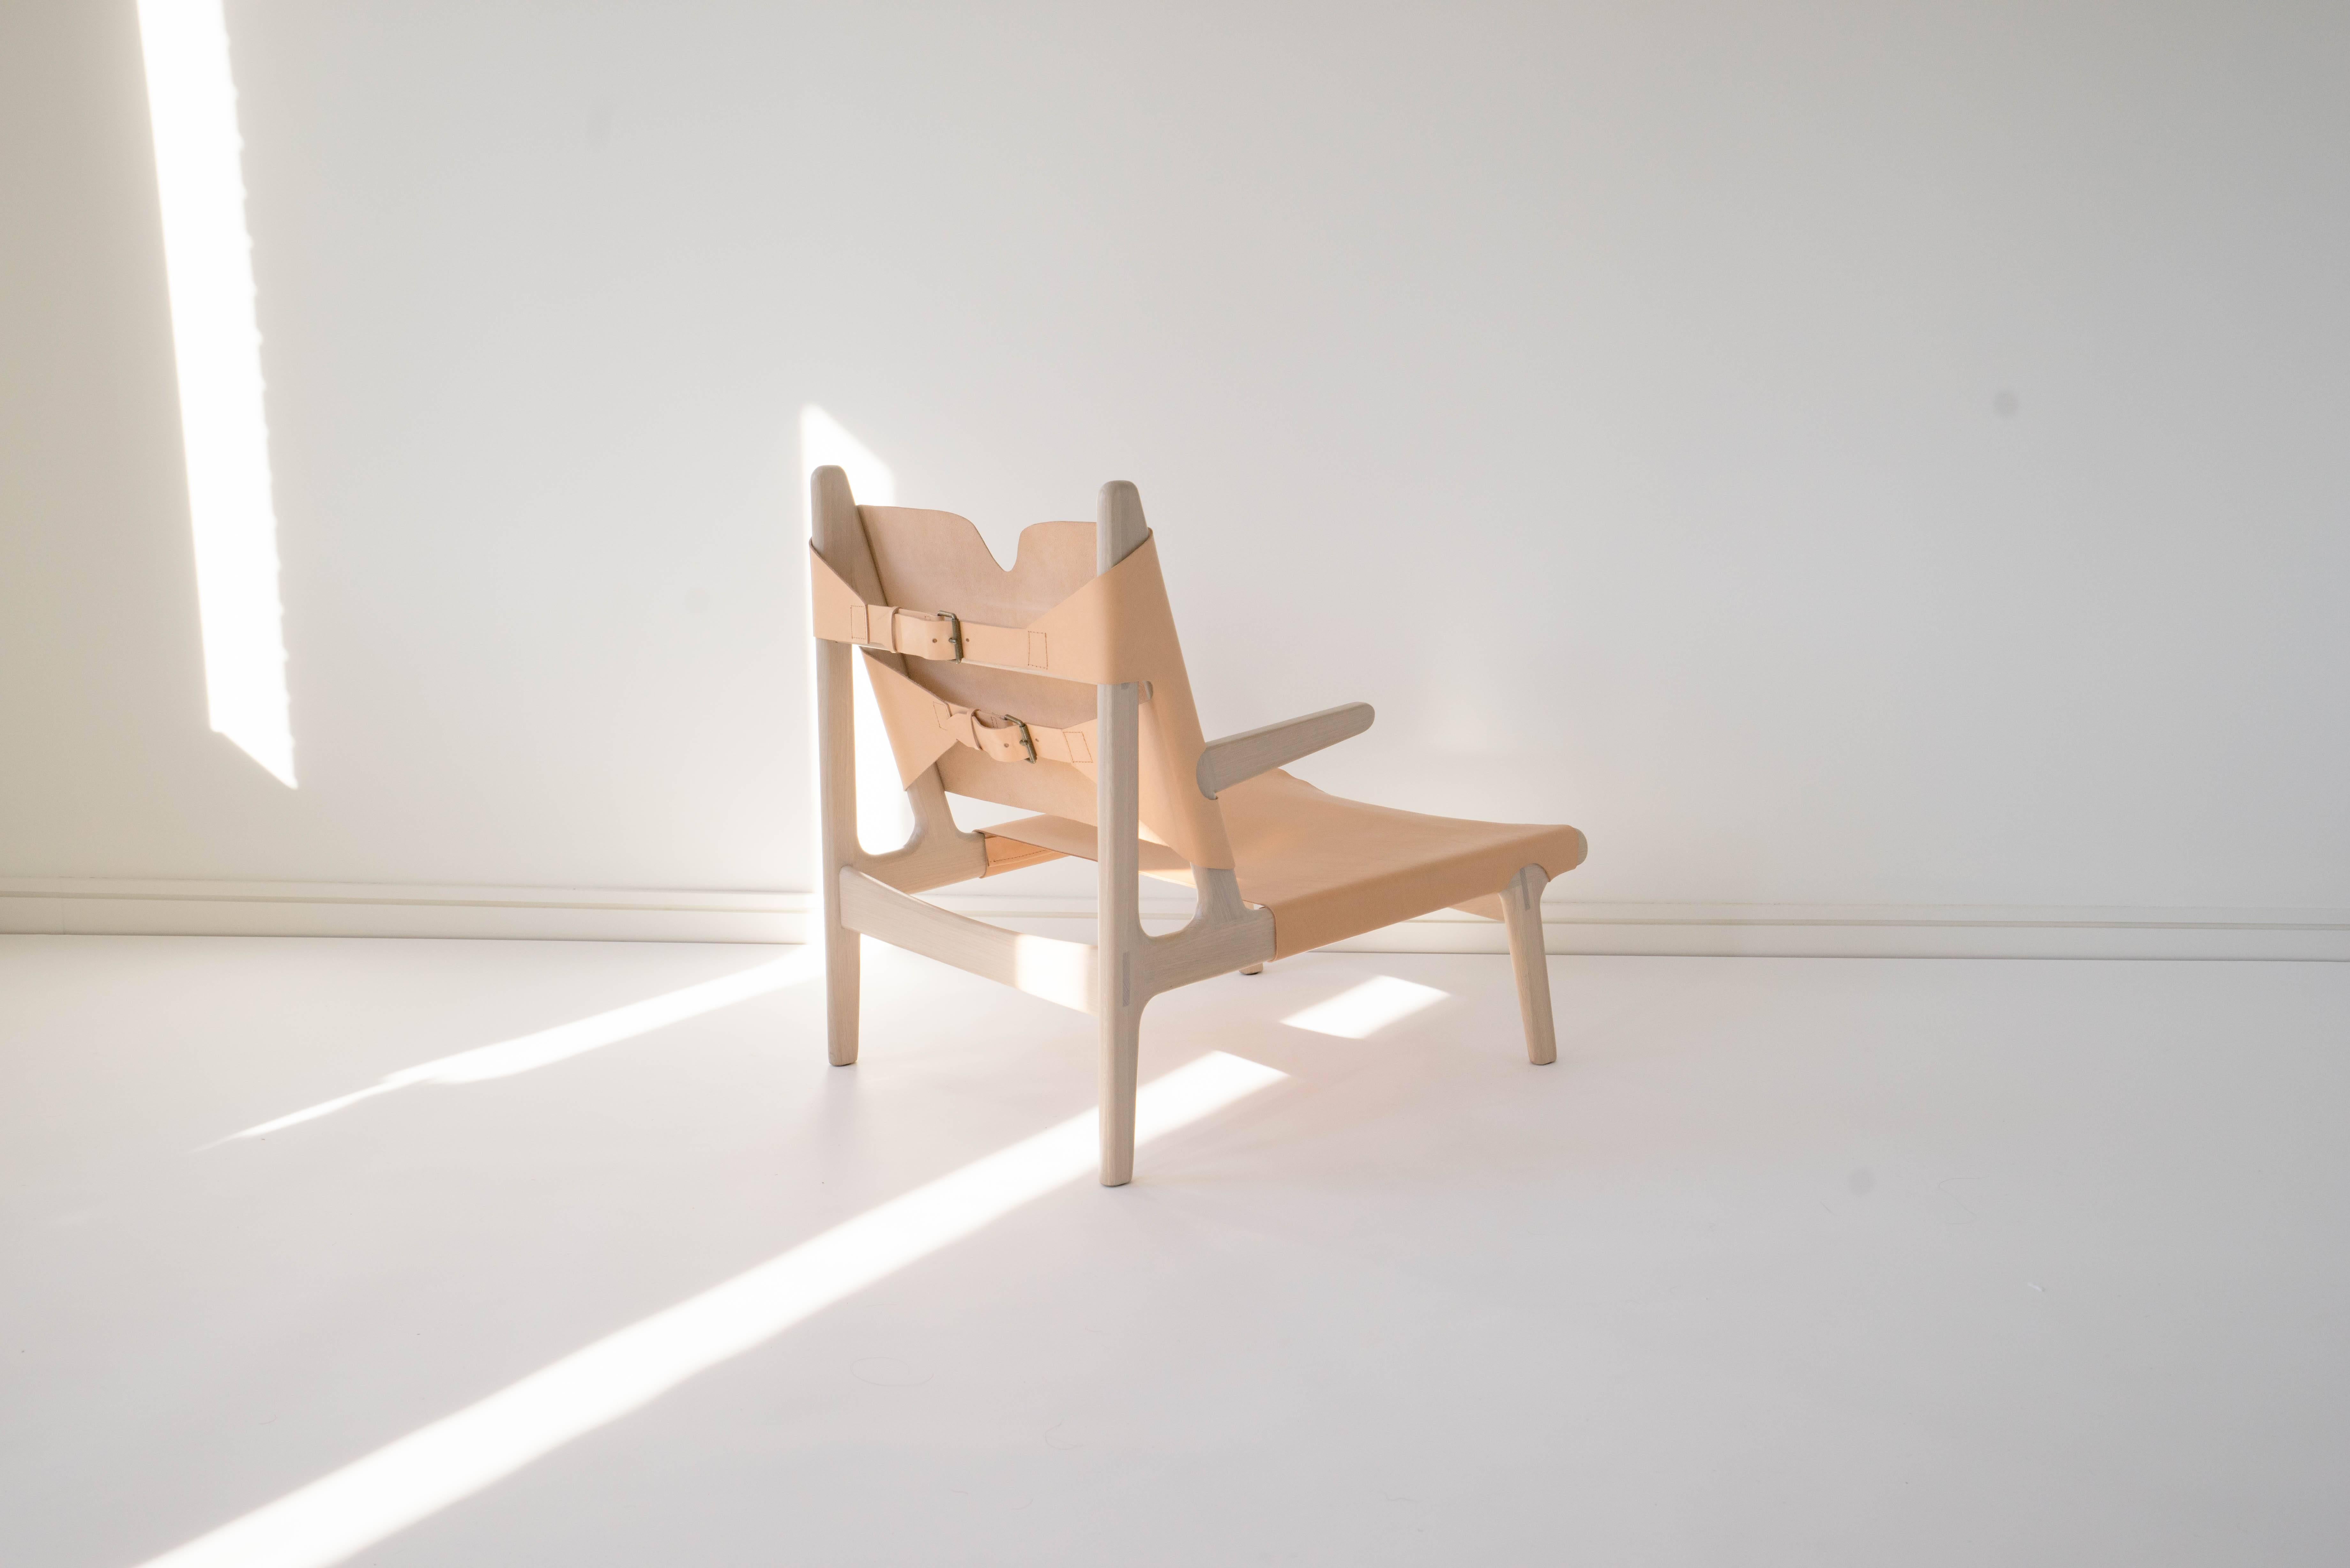 Sun at Six is a contemporary furniture design studio that works with traditional Chinese joinery masters to handcraft our pieces using traditional joinery. Vegetable tanned leather will patina with age. Exposed joinery throughout. Also available in